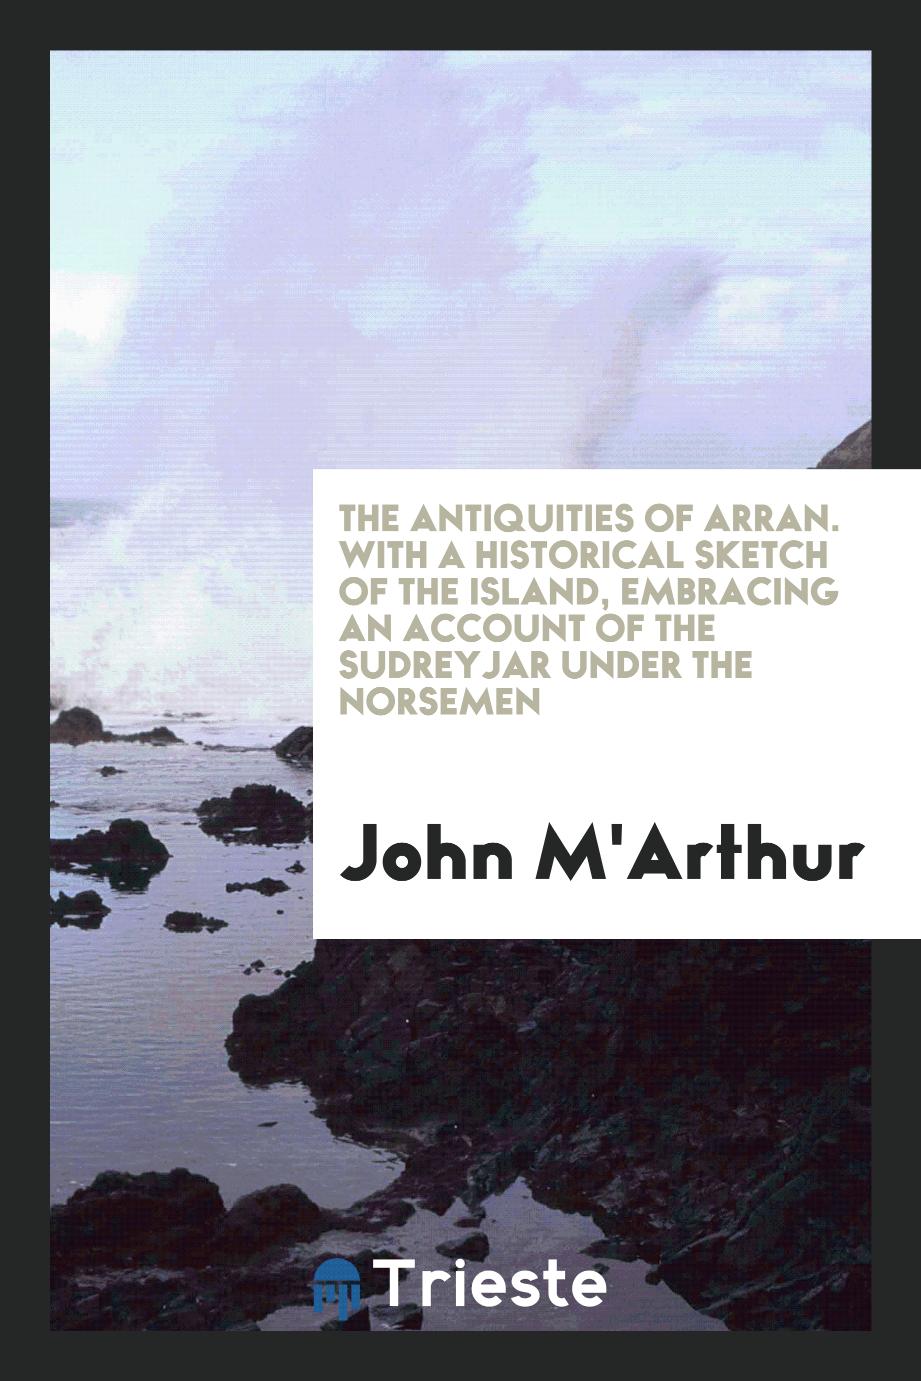 The Antiquities of Arran. With a Historical Sketch of the Island, Embracing an Account of the Sudreyjar Under the Norsemen